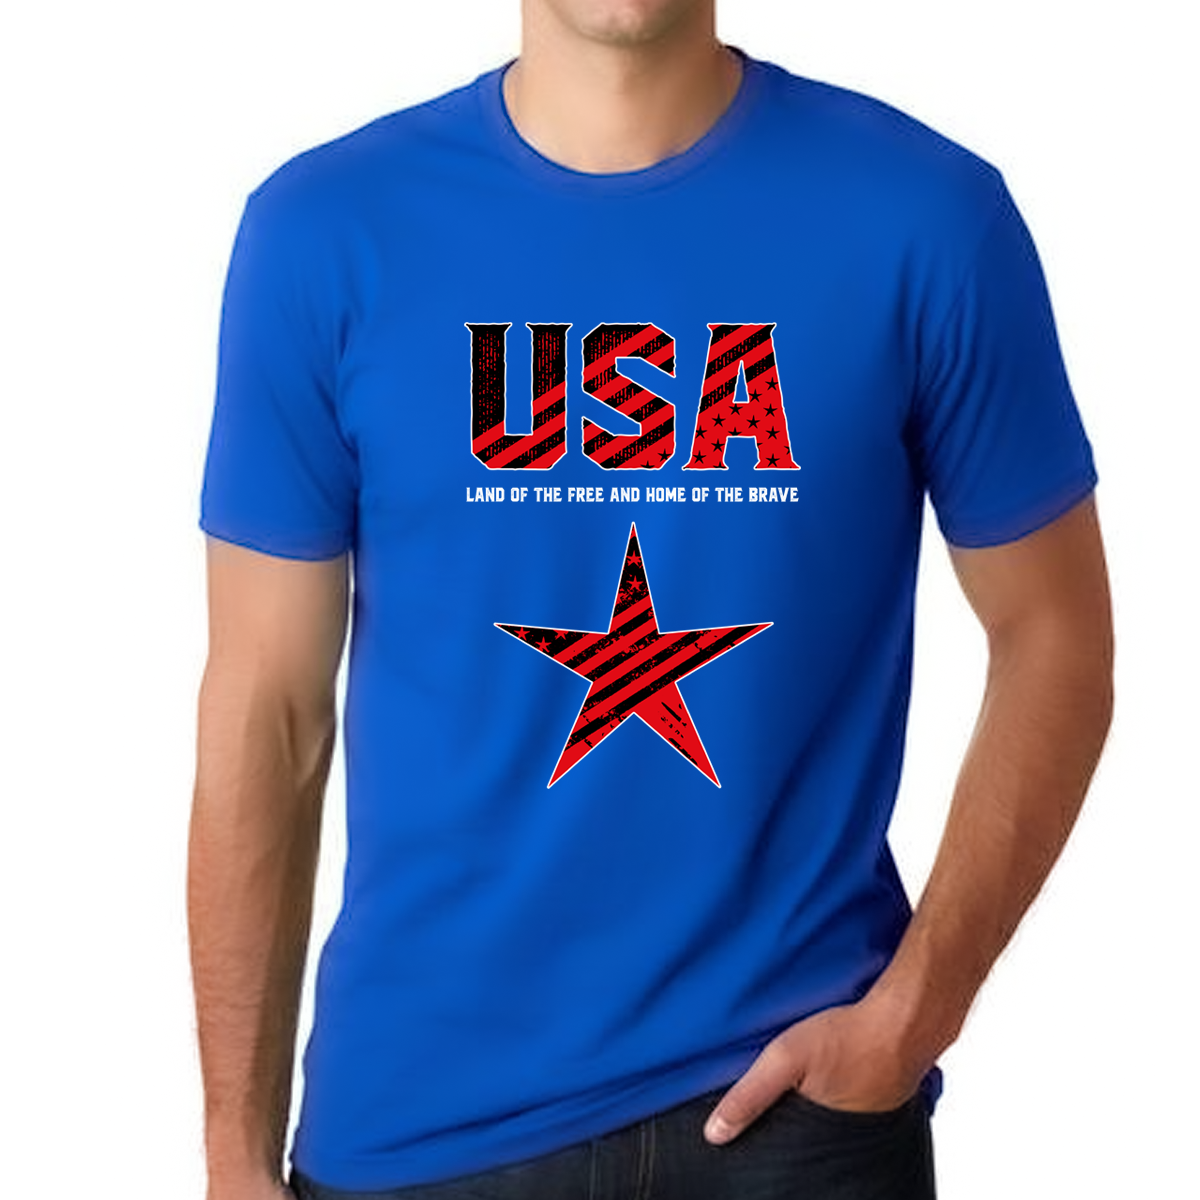 4th of July Shirts for Men - 4th of July Shirts - America Shirt - USA Shirt - 4th of July Shirt - Fire Fit Designs